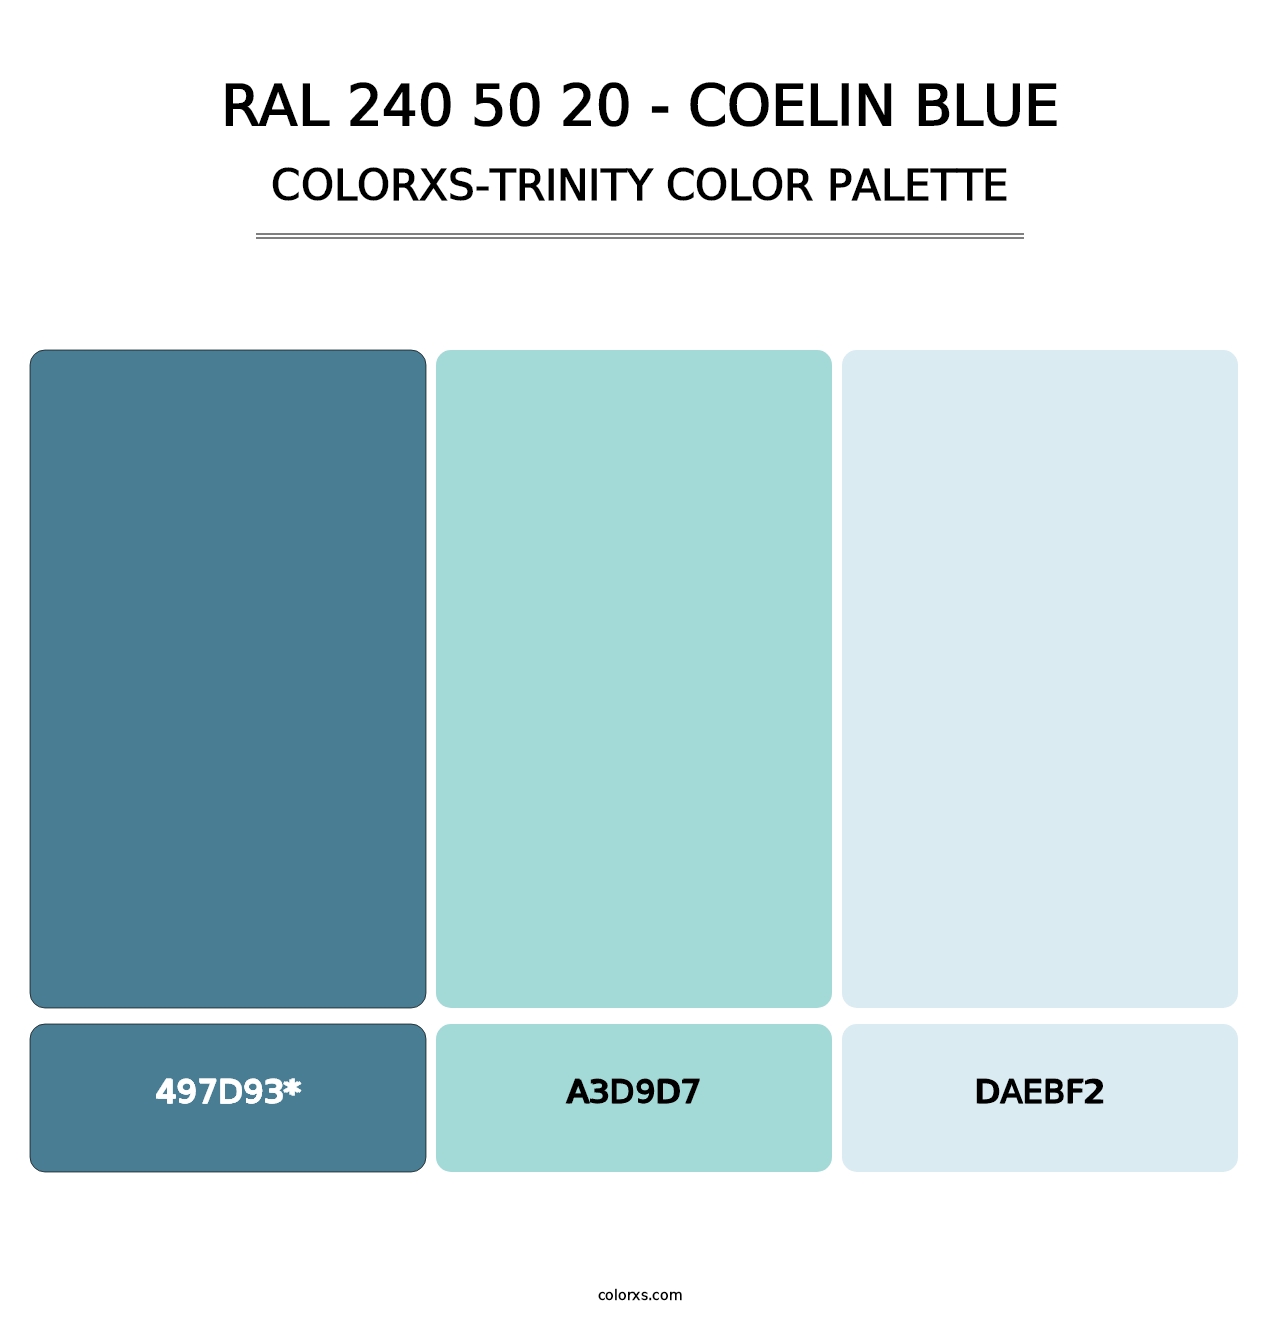 RAL 240 50 20 - Coelin Blue - Colorxs Trinity Palette